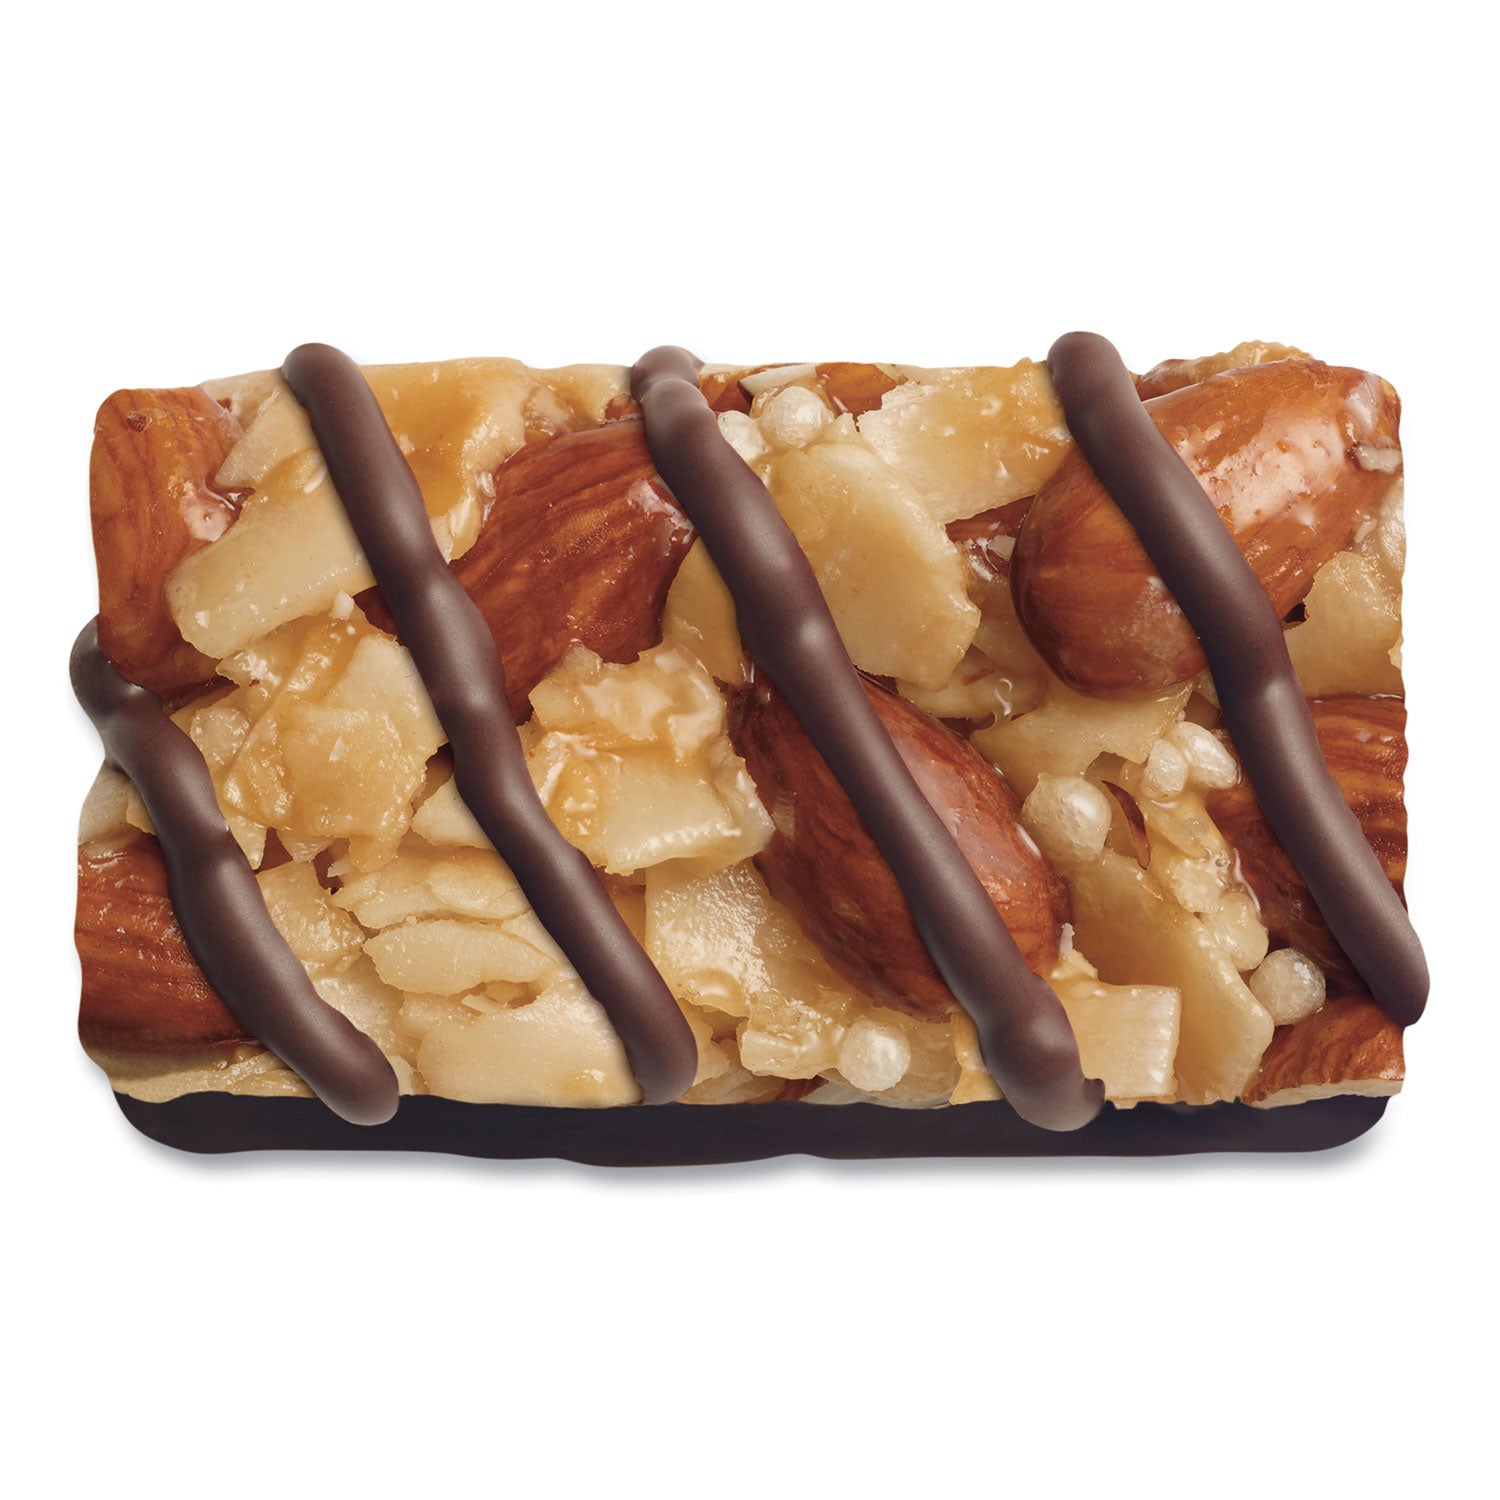 minis-salted-caramel-and-dark-chocolate-nut-dark-chocolate-almond-and-coconut-07-oz-20-pack_knd27970 - 4